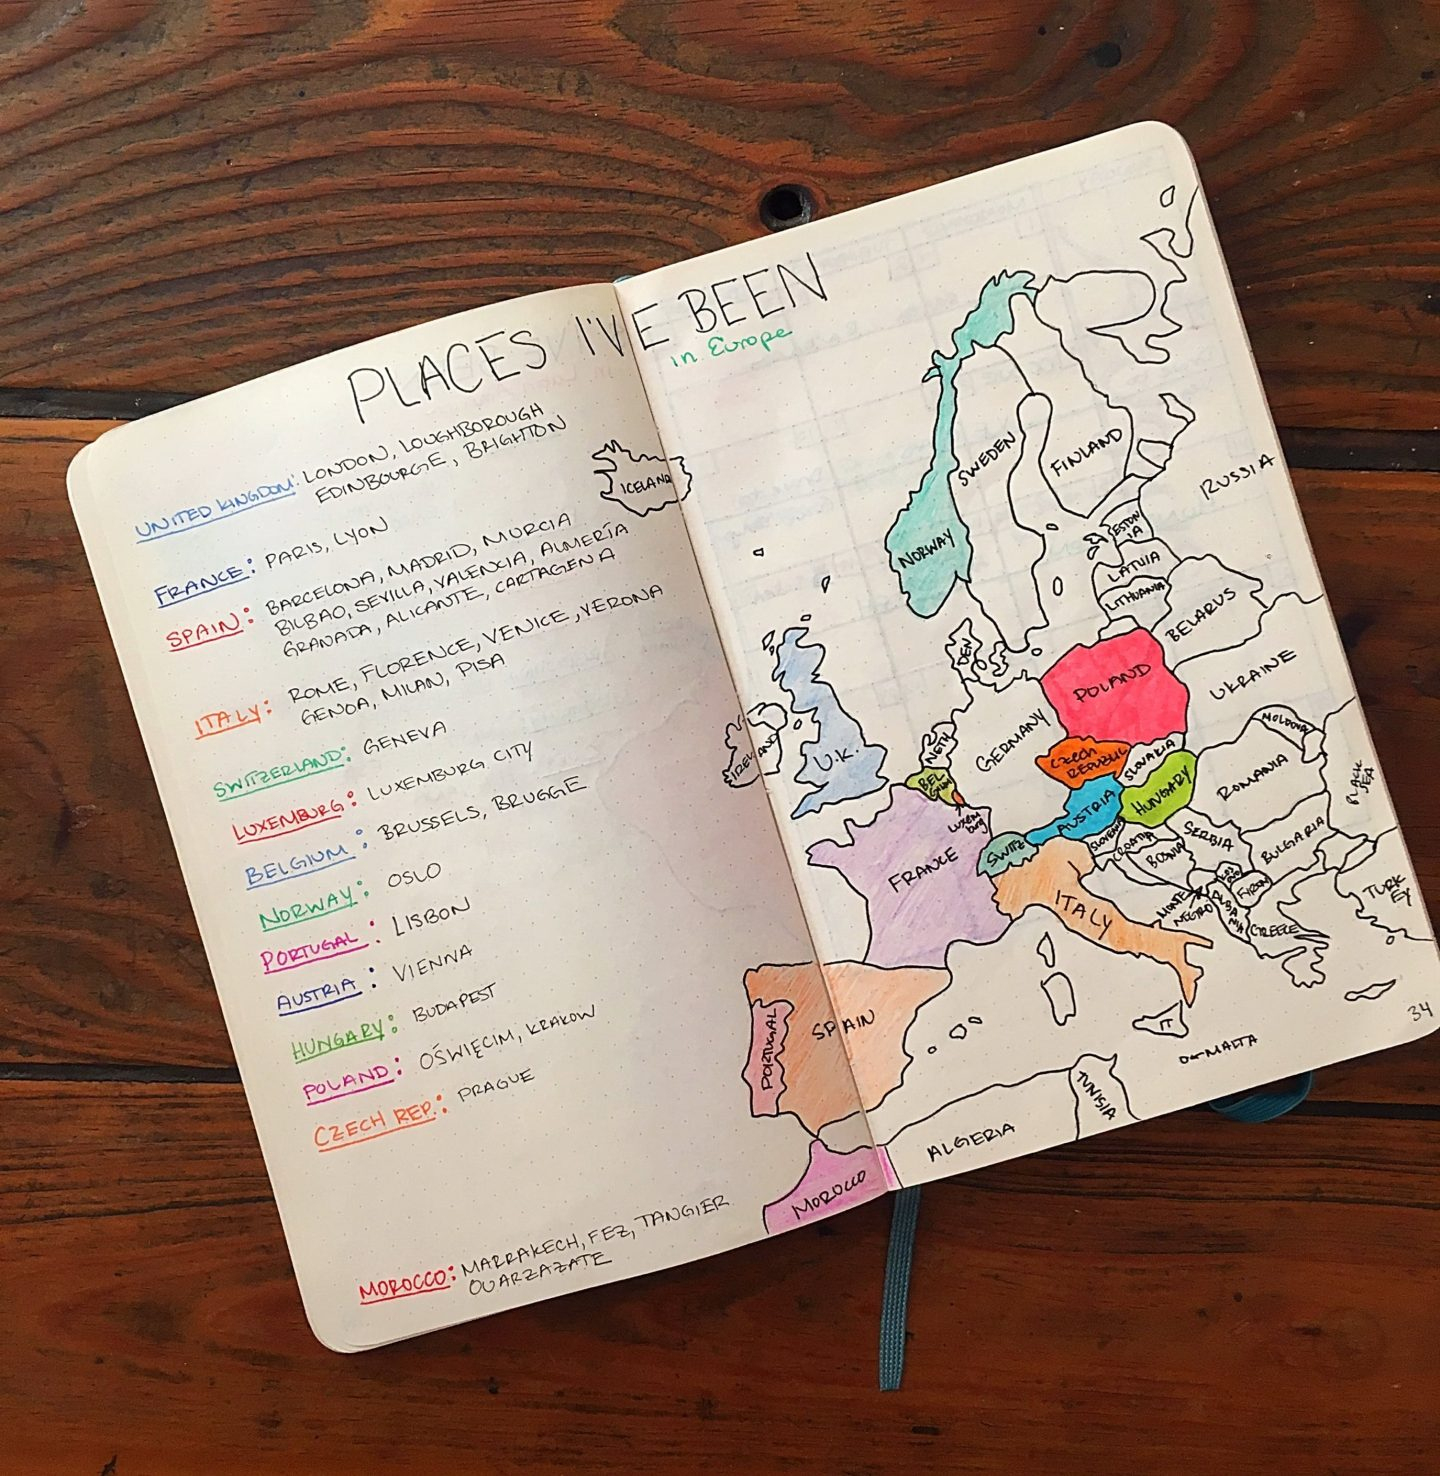 How To Make Maps In Your Bullet Journal | Bad With Directions - How To Make A Printable Map